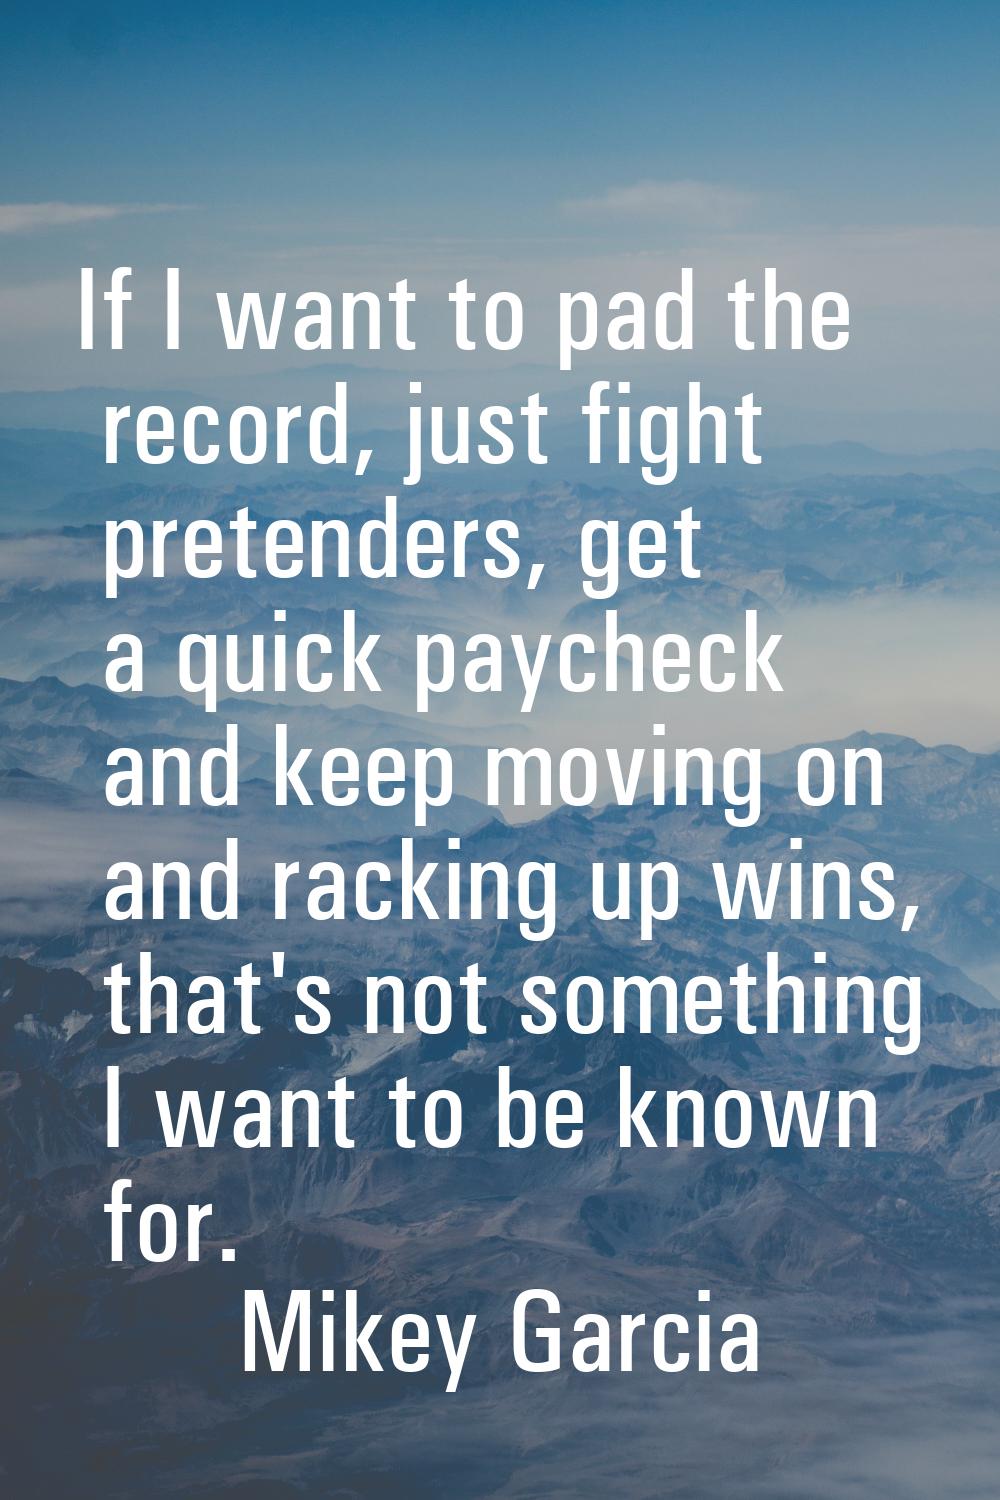 If I want to pad the record, just fight pretenders, get a quick paycheck and keep moving on and rac